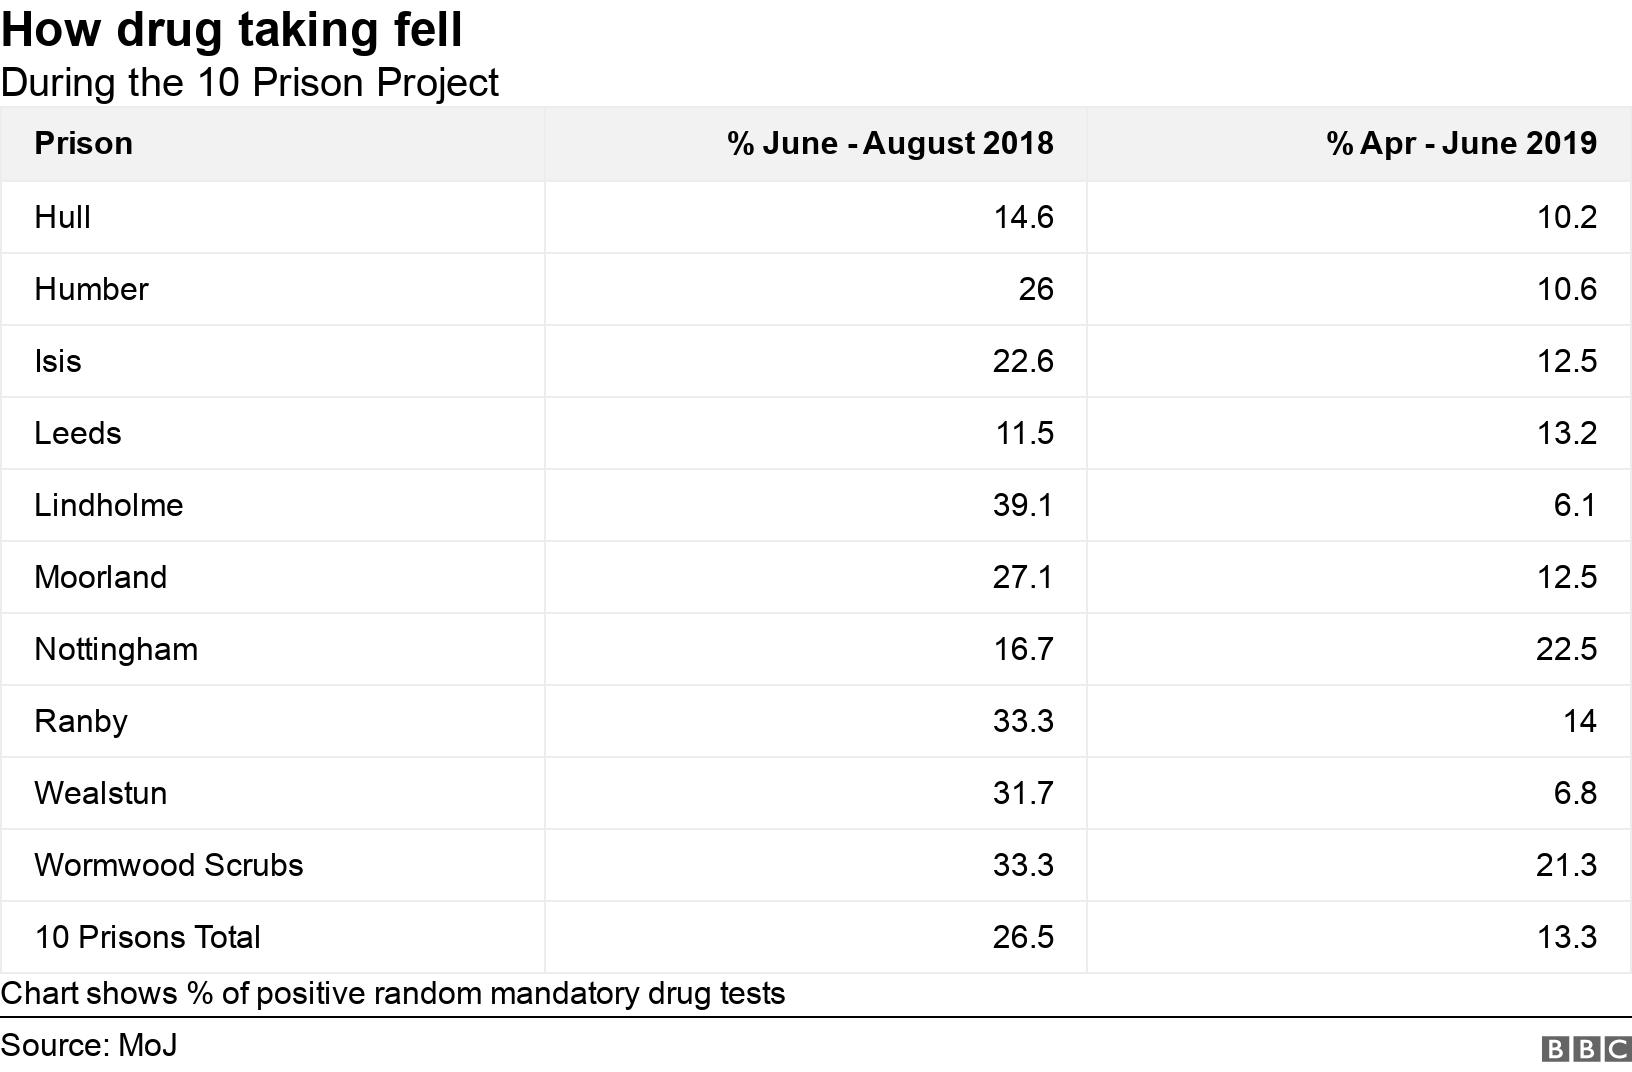 How drug taking fell. During the 10 Prison Project.  Chart shows % of positive random mandatory drug tests.